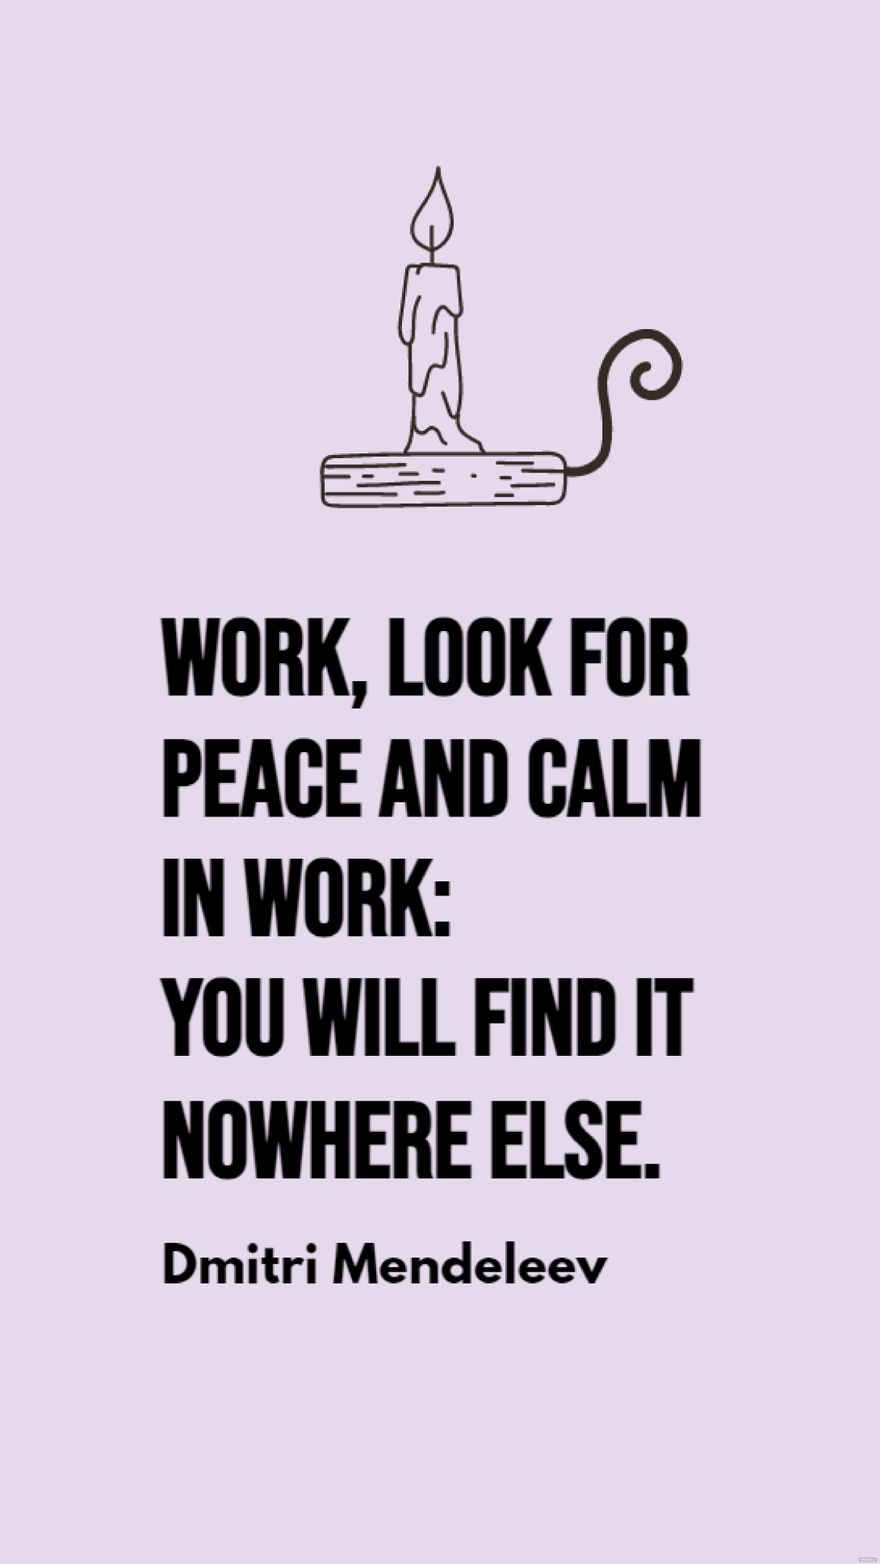 Dmitri Mendeleev - Work, look for peace and calm in work: you will find it nowhere else. in JPG